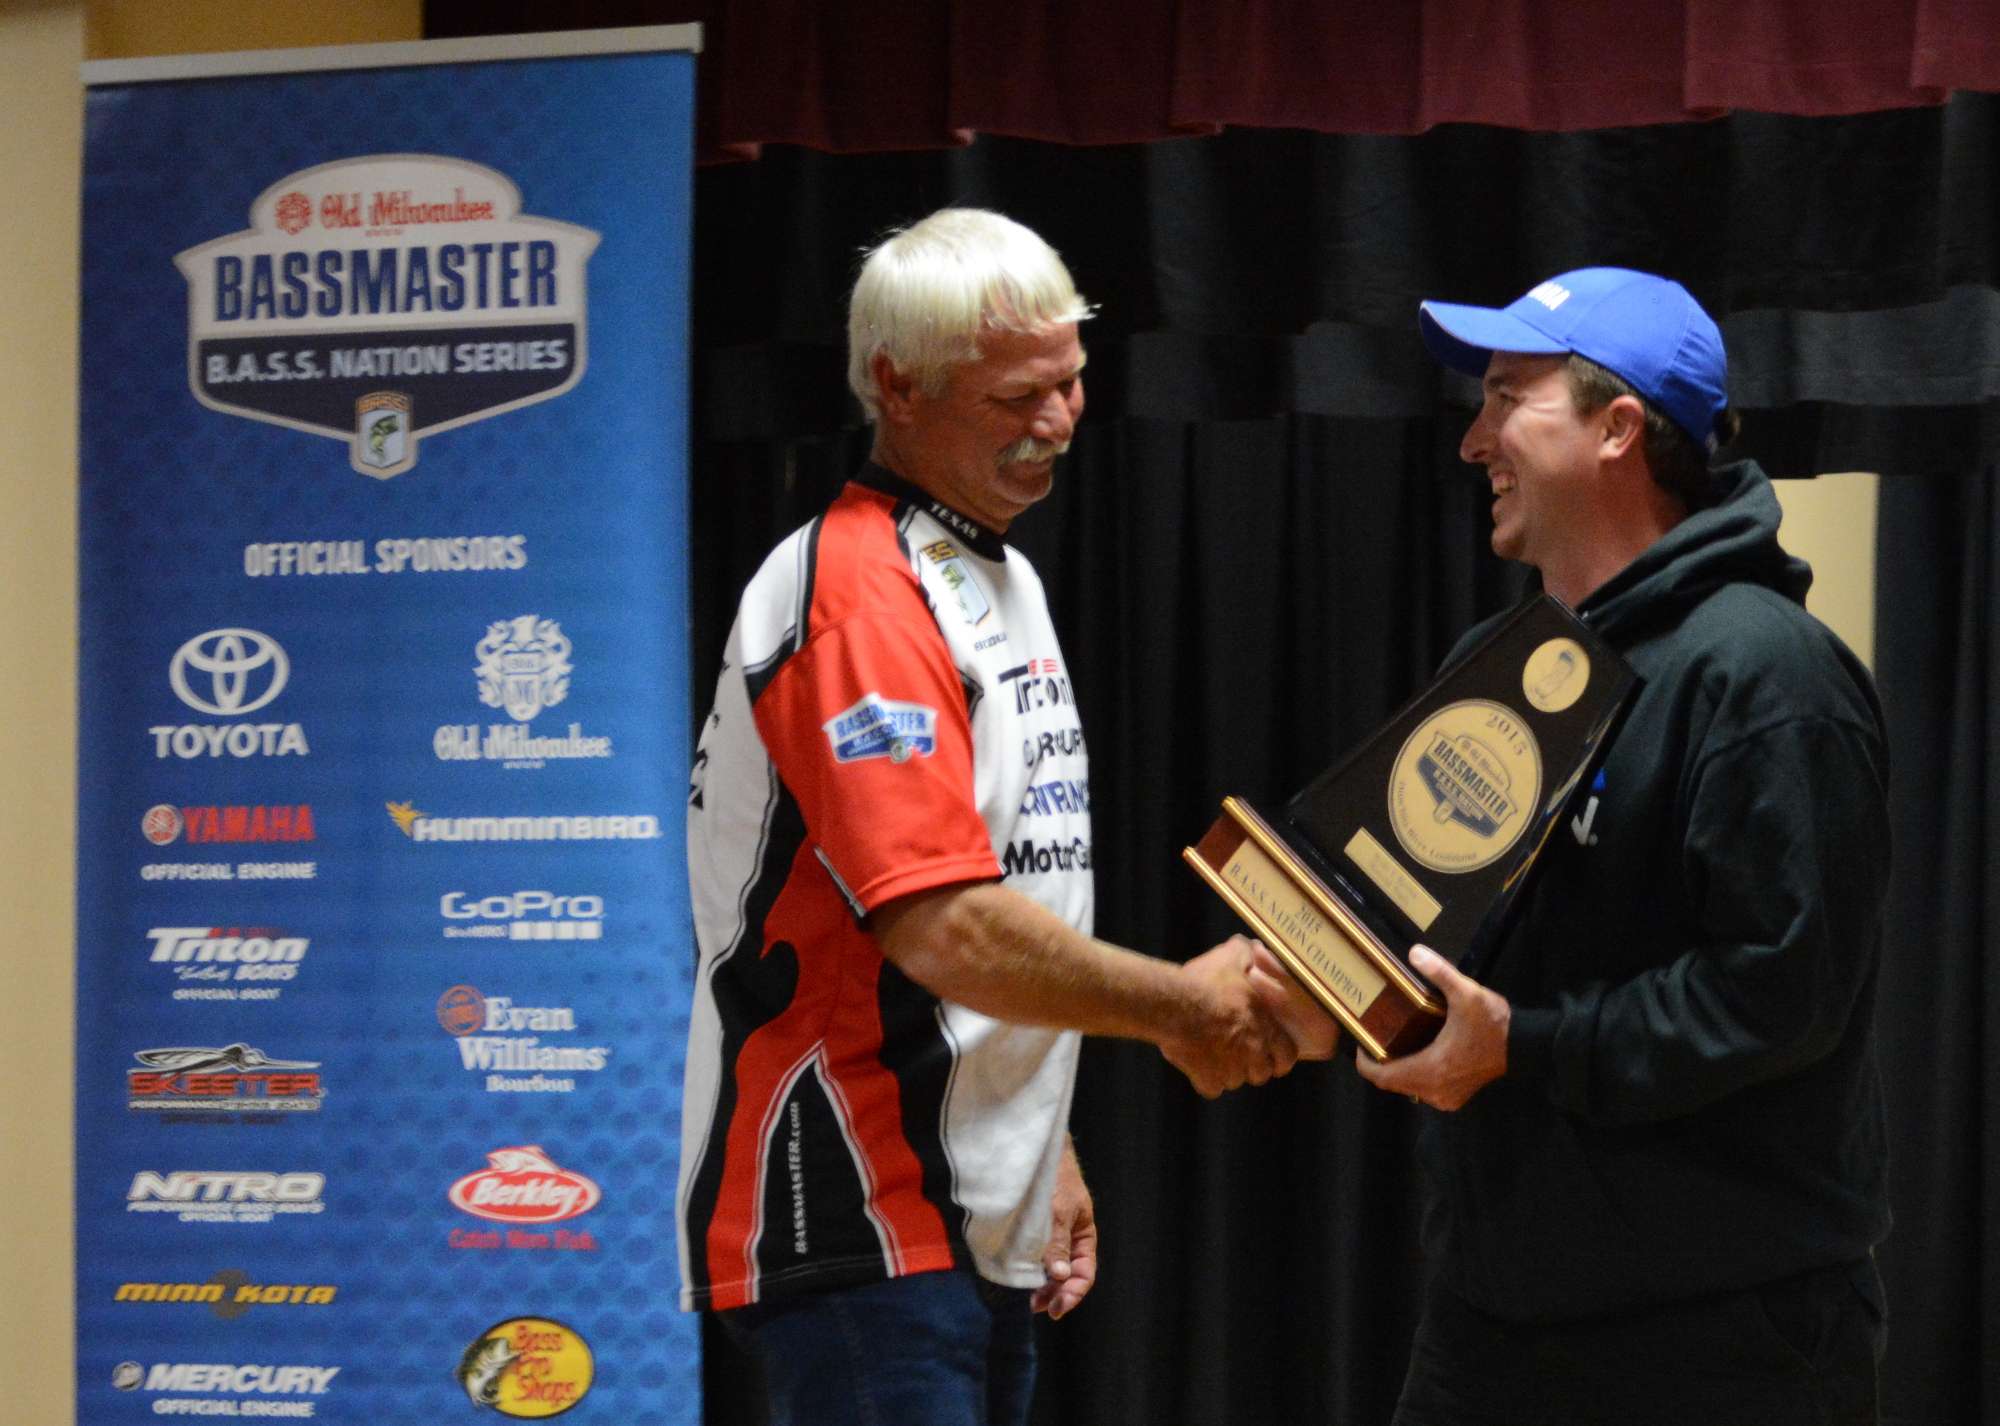 Mueller handed off the Bryan V. Kerchal Memorial Trophy to Albert Collins, winner of the 2015 Old Milwaukee B.A.S.S. Nation Championship.